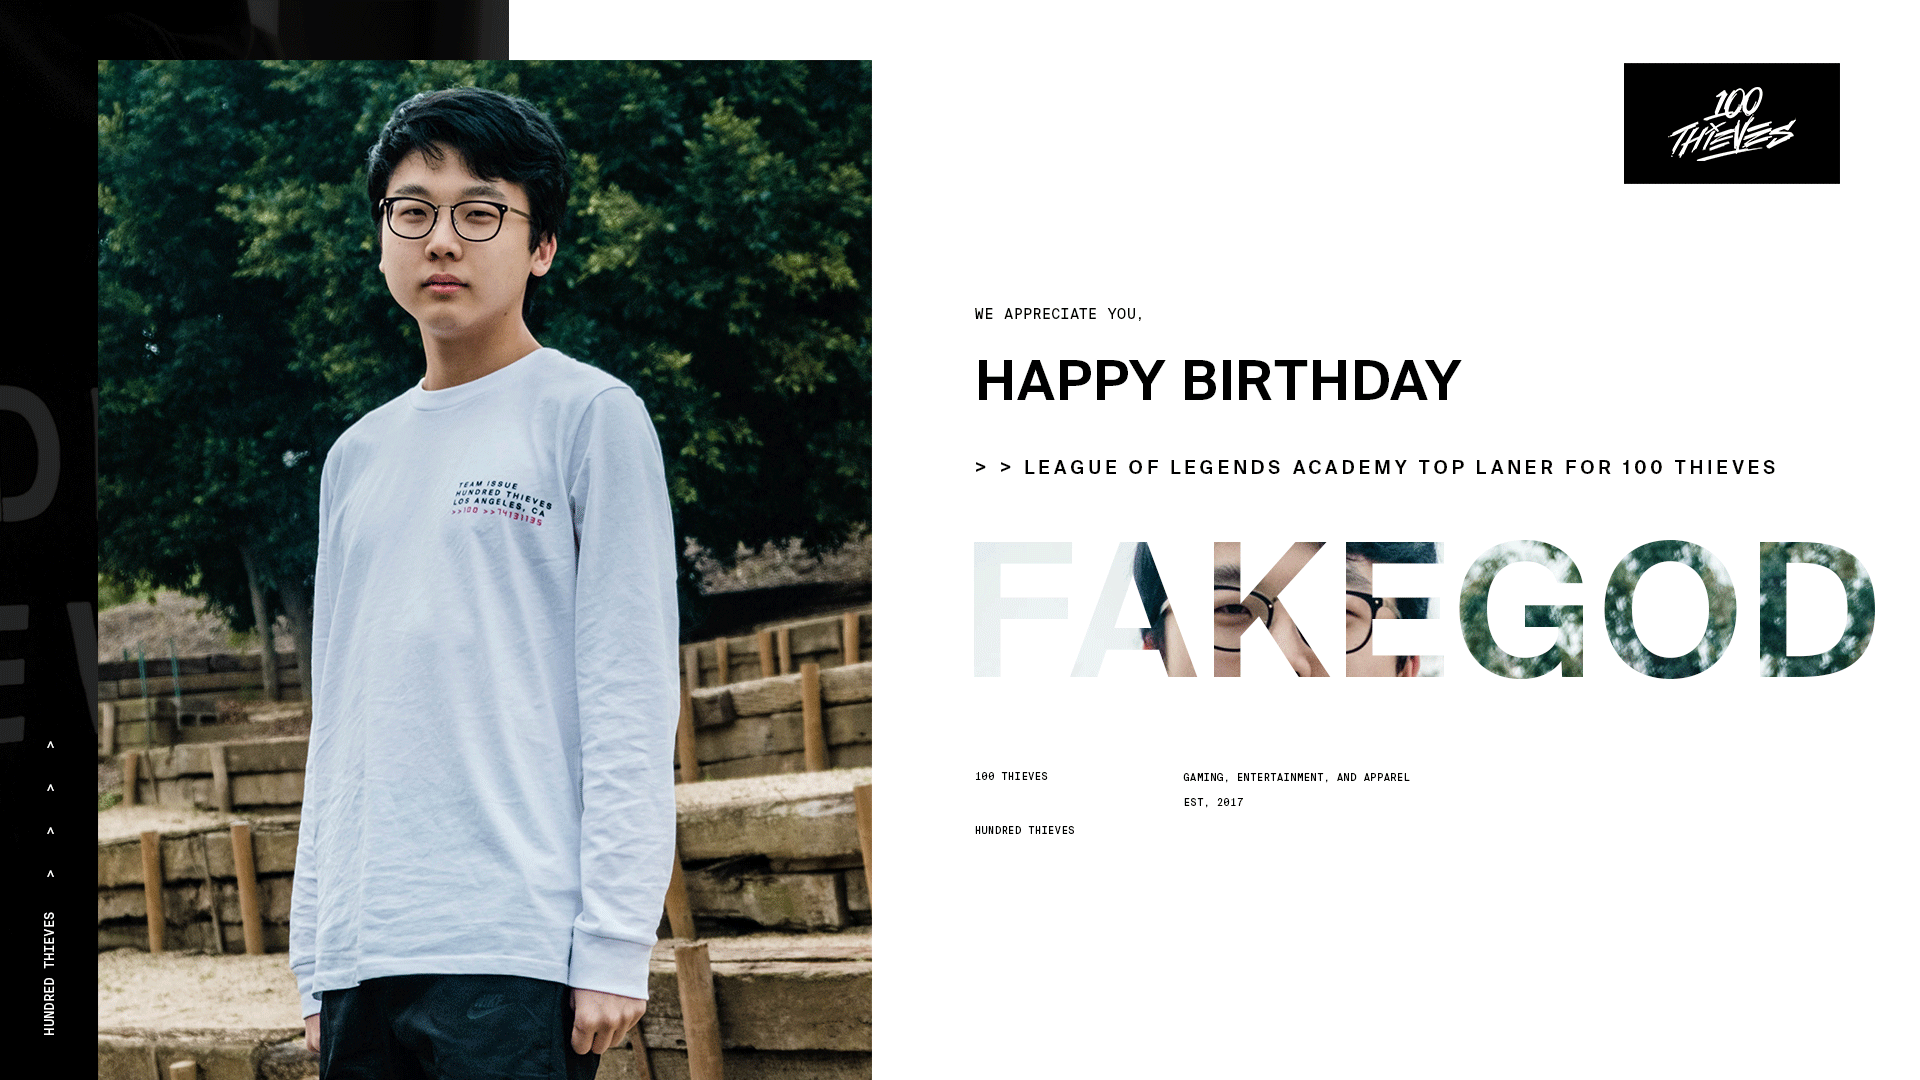 100 Thieves on X: Happy birthday @neekolul! We're so excited to have you  as part of 100 Thieves and look forward to an amazing year together. Have a  wonderful birthday! 🎉  /